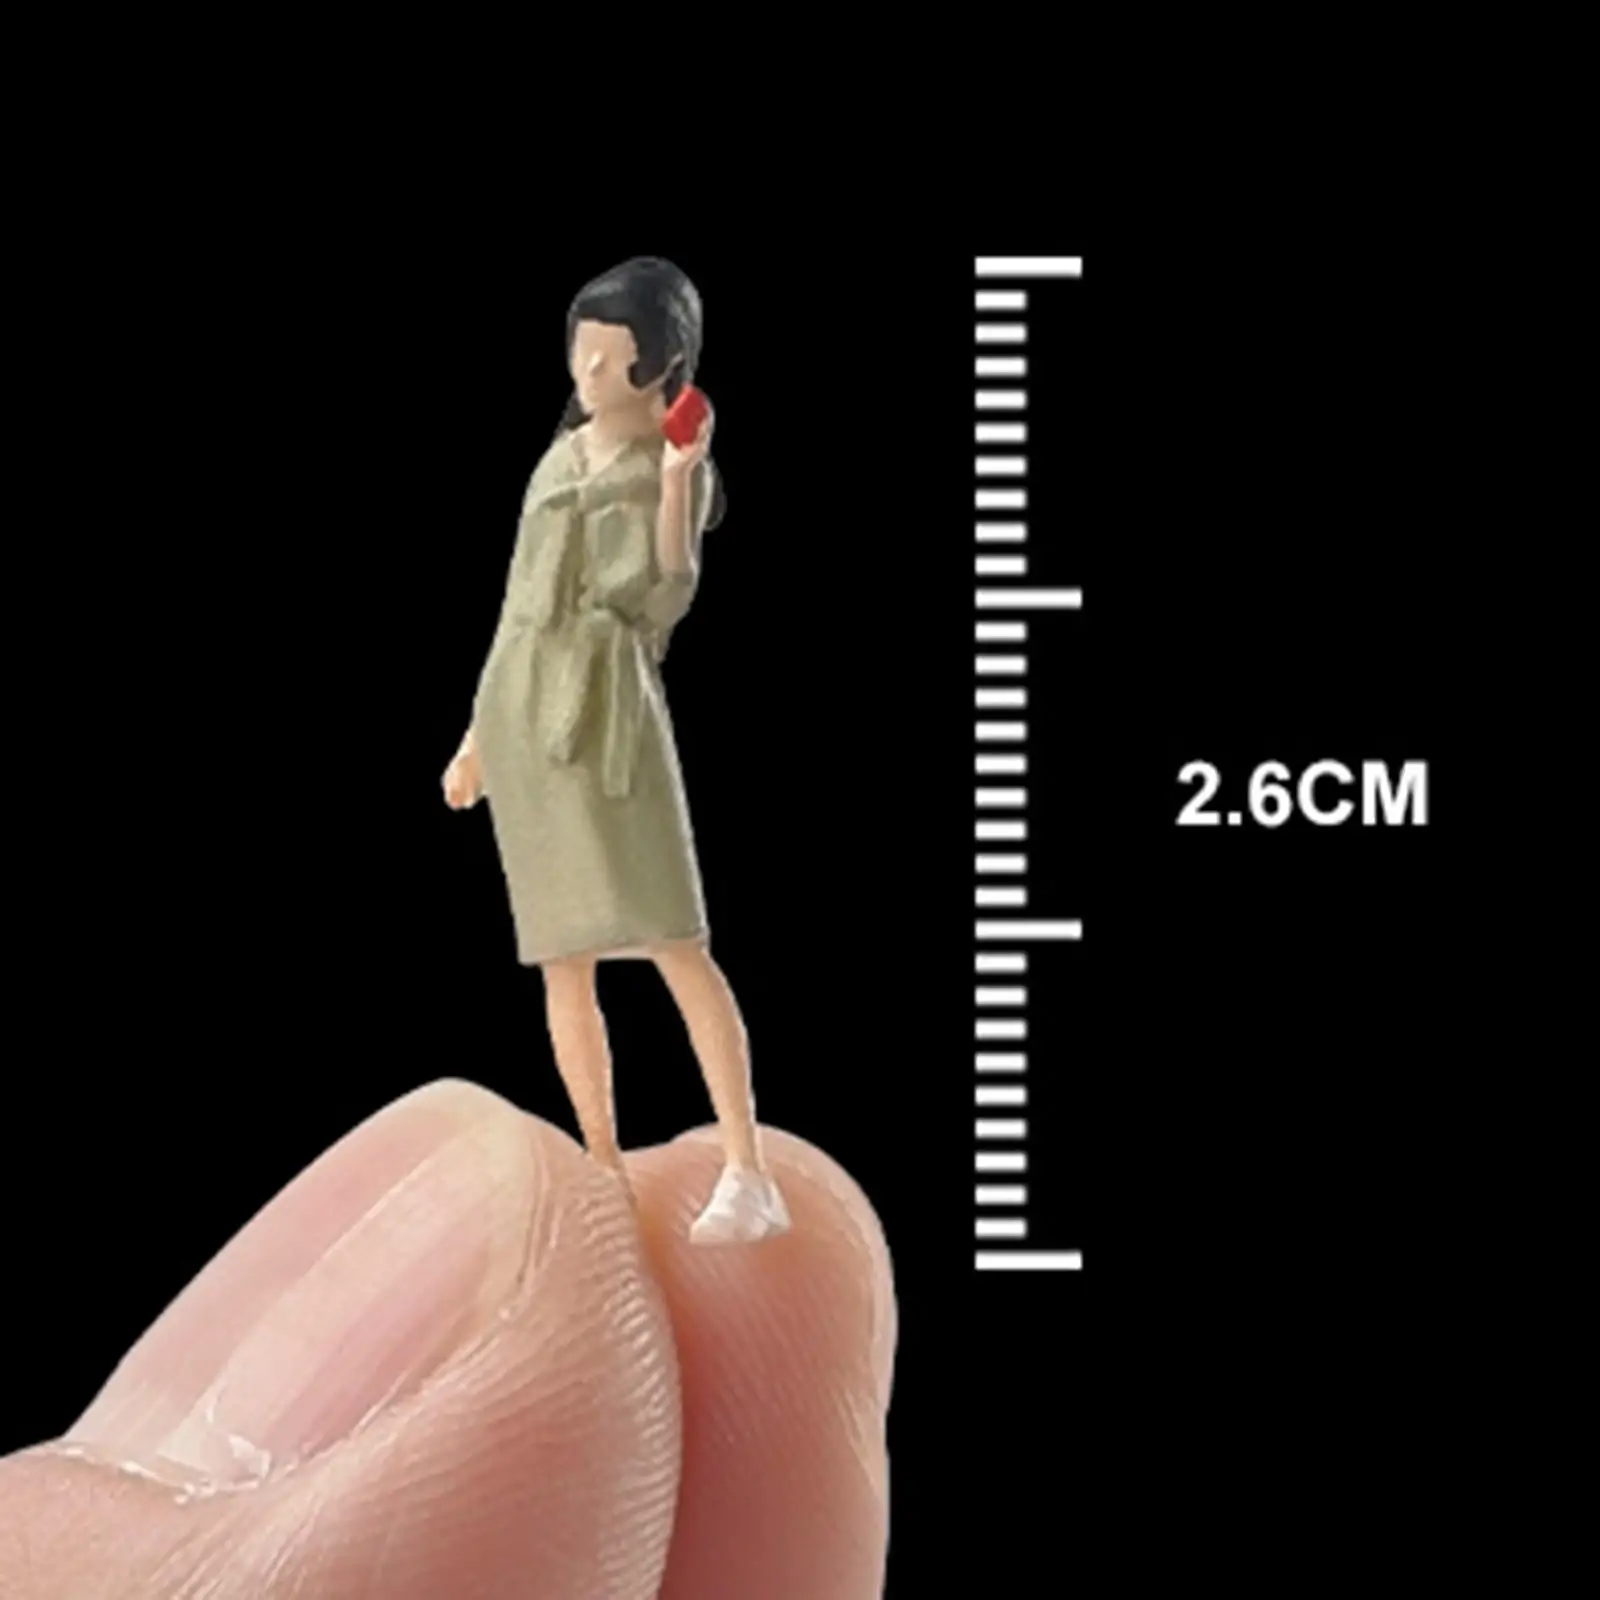 1/64 Scale People Model Resin with Cola Architectural Painted Figures for Fairy Garden Sand Table Desktop Decoration DIY Scene